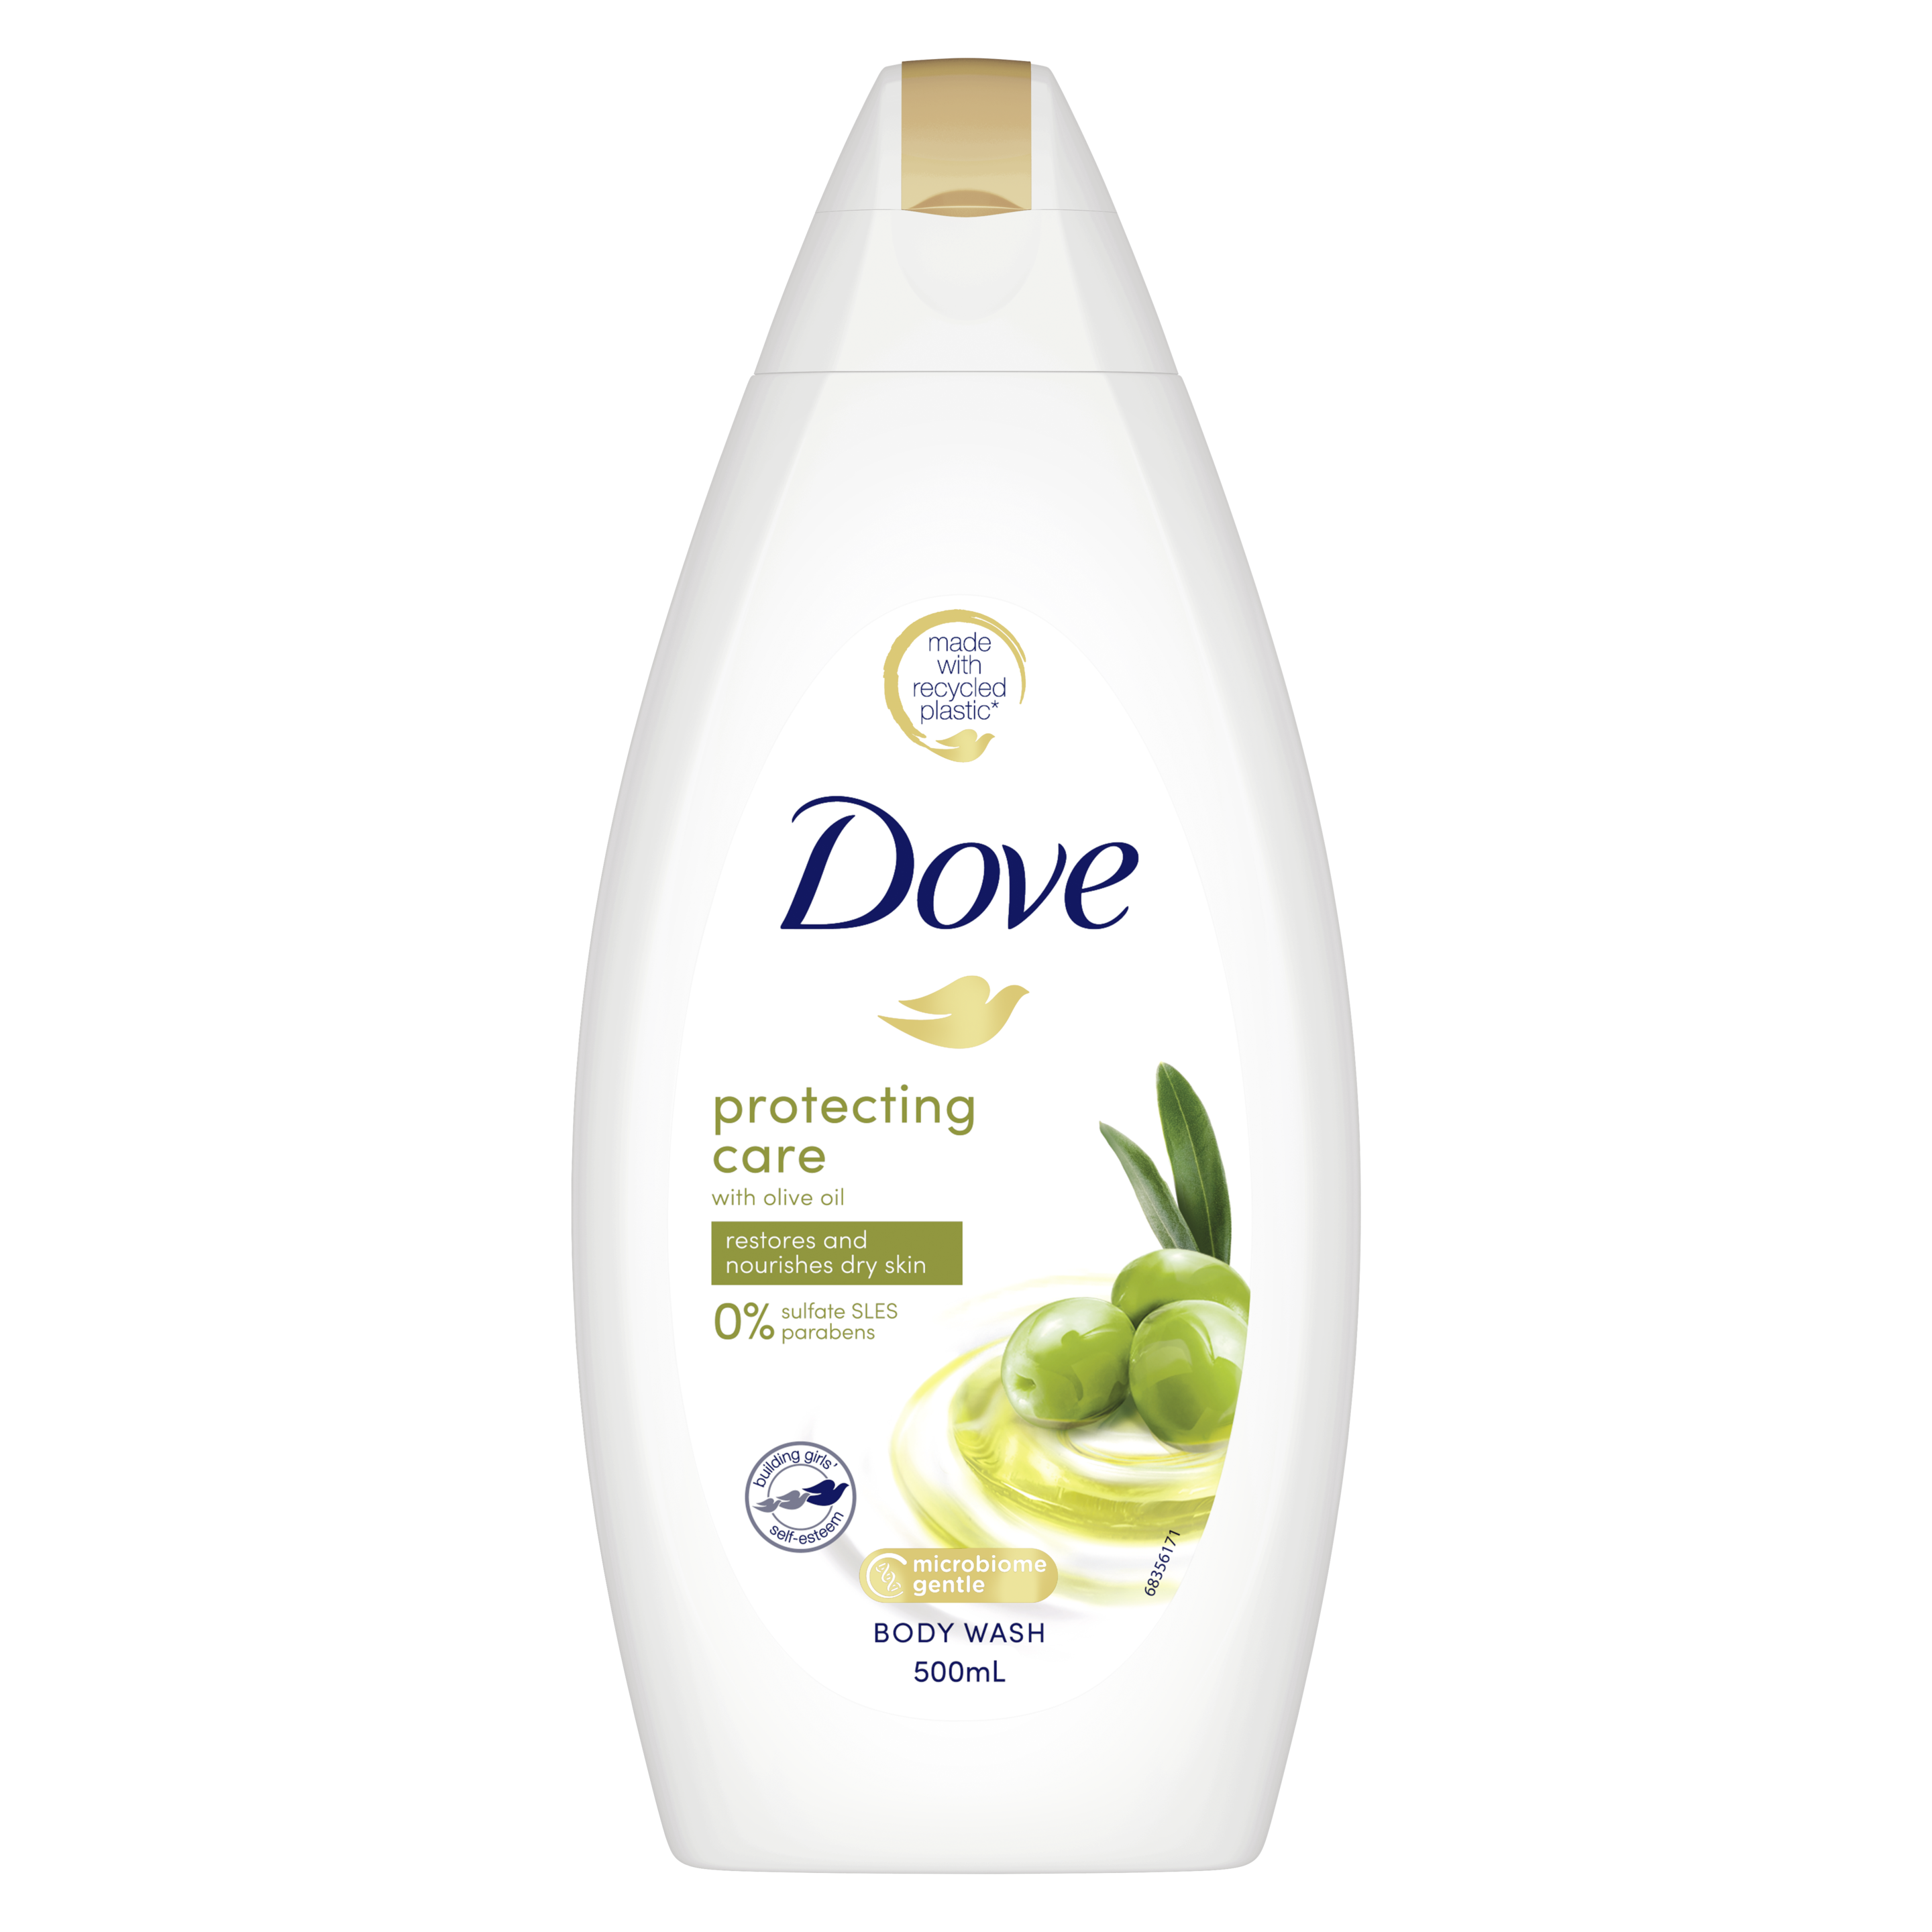 Dove Protecting Care Body Wash 500ml Text